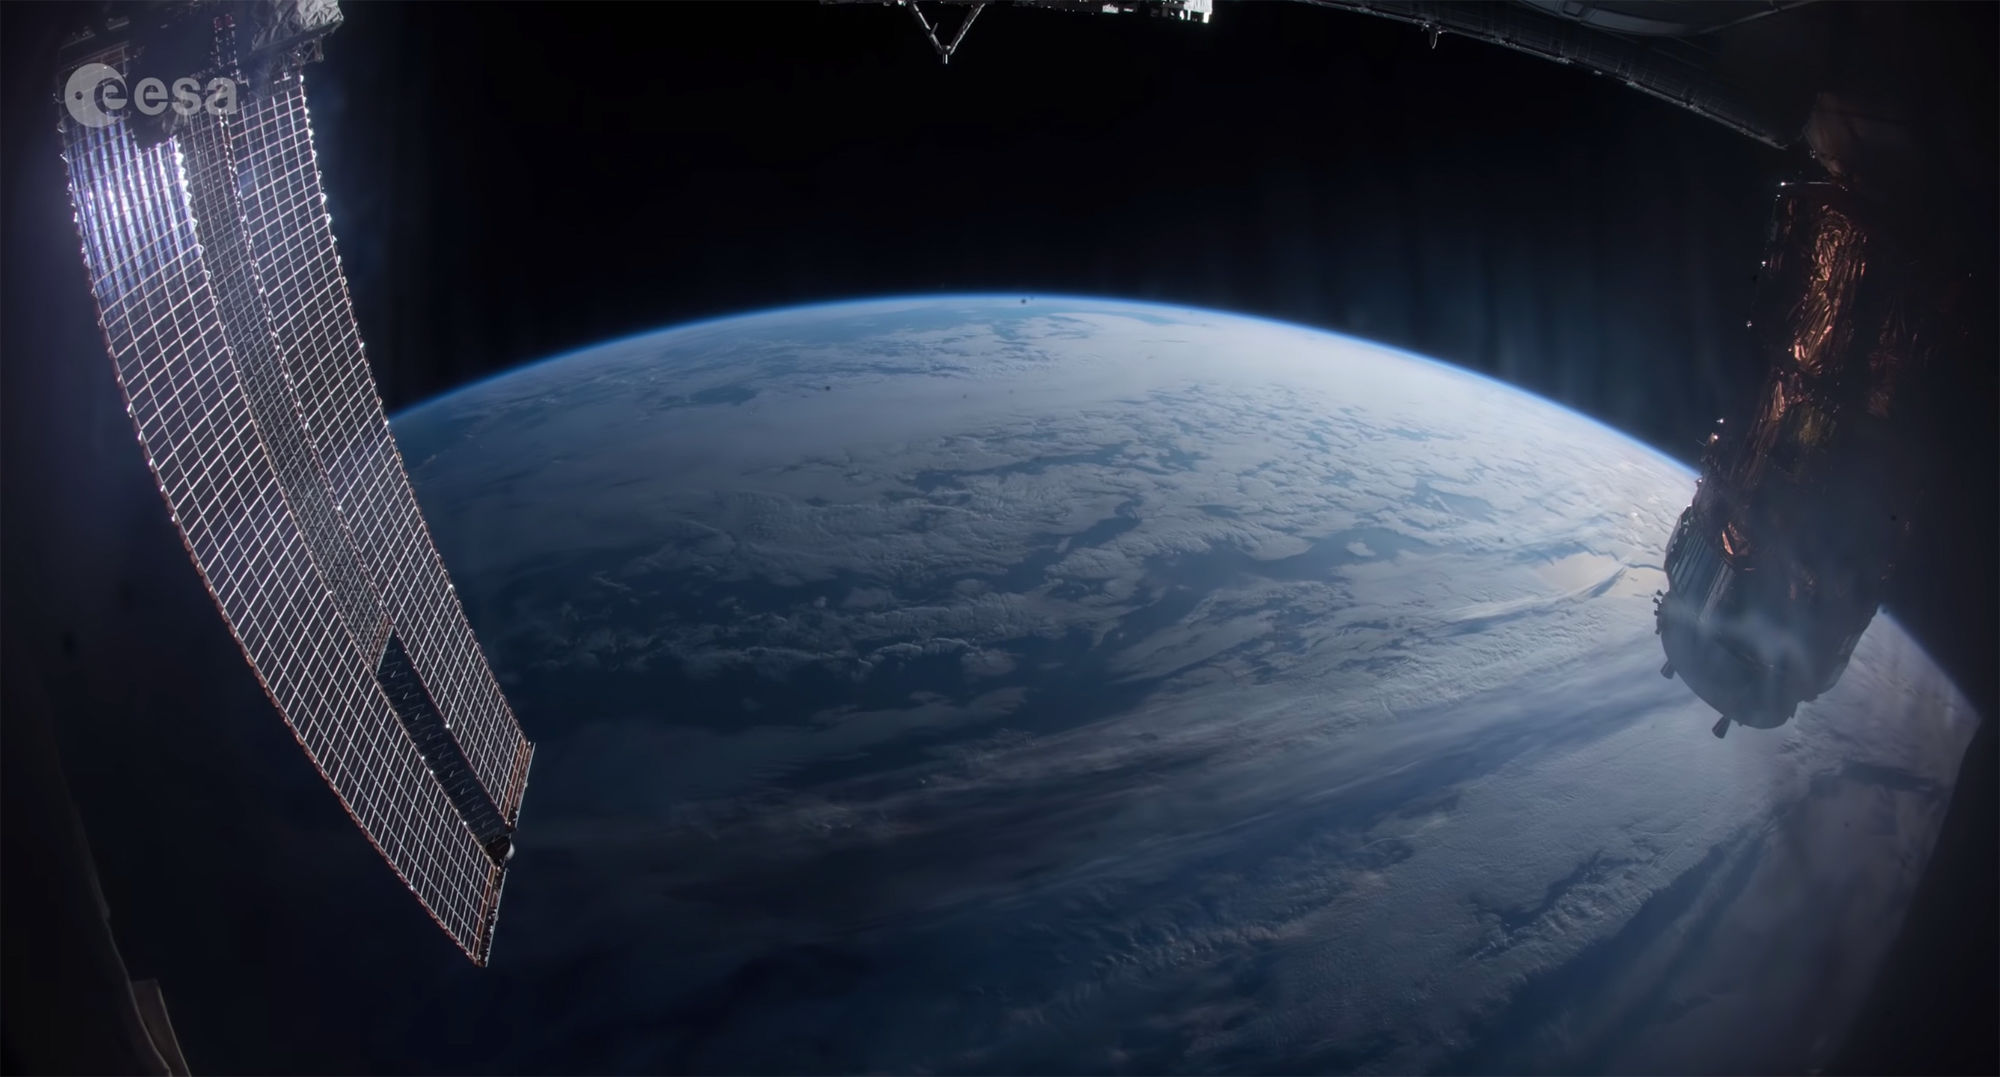 A view of the Earth from the International Space Station, part of a video celebrating the 20th anniversary of the launch of the first section. Credit: ESA/NASA